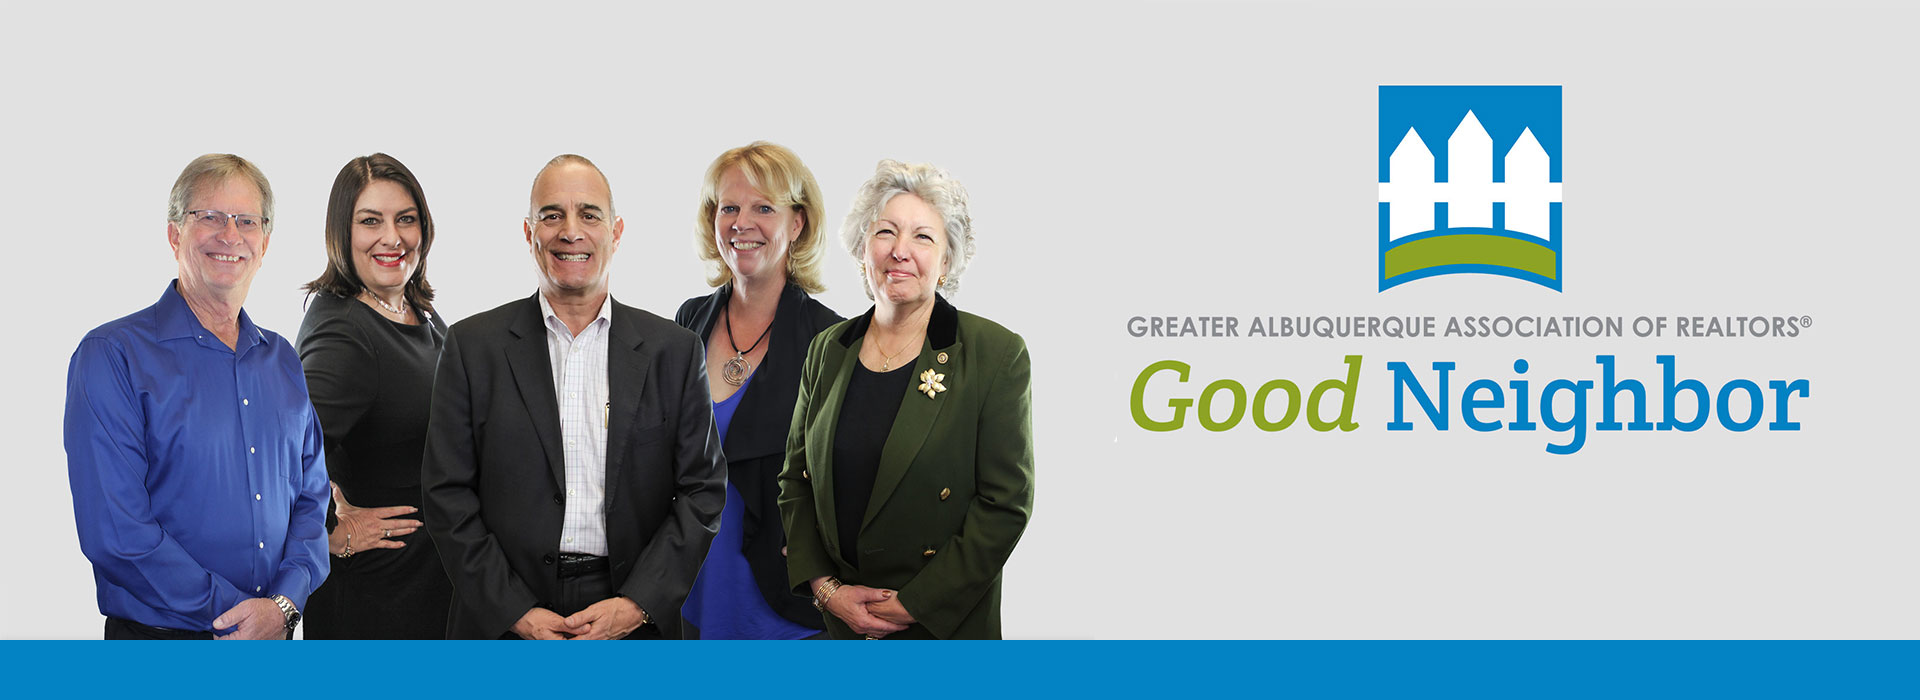 Nominate a Good Neighbor by November 4th